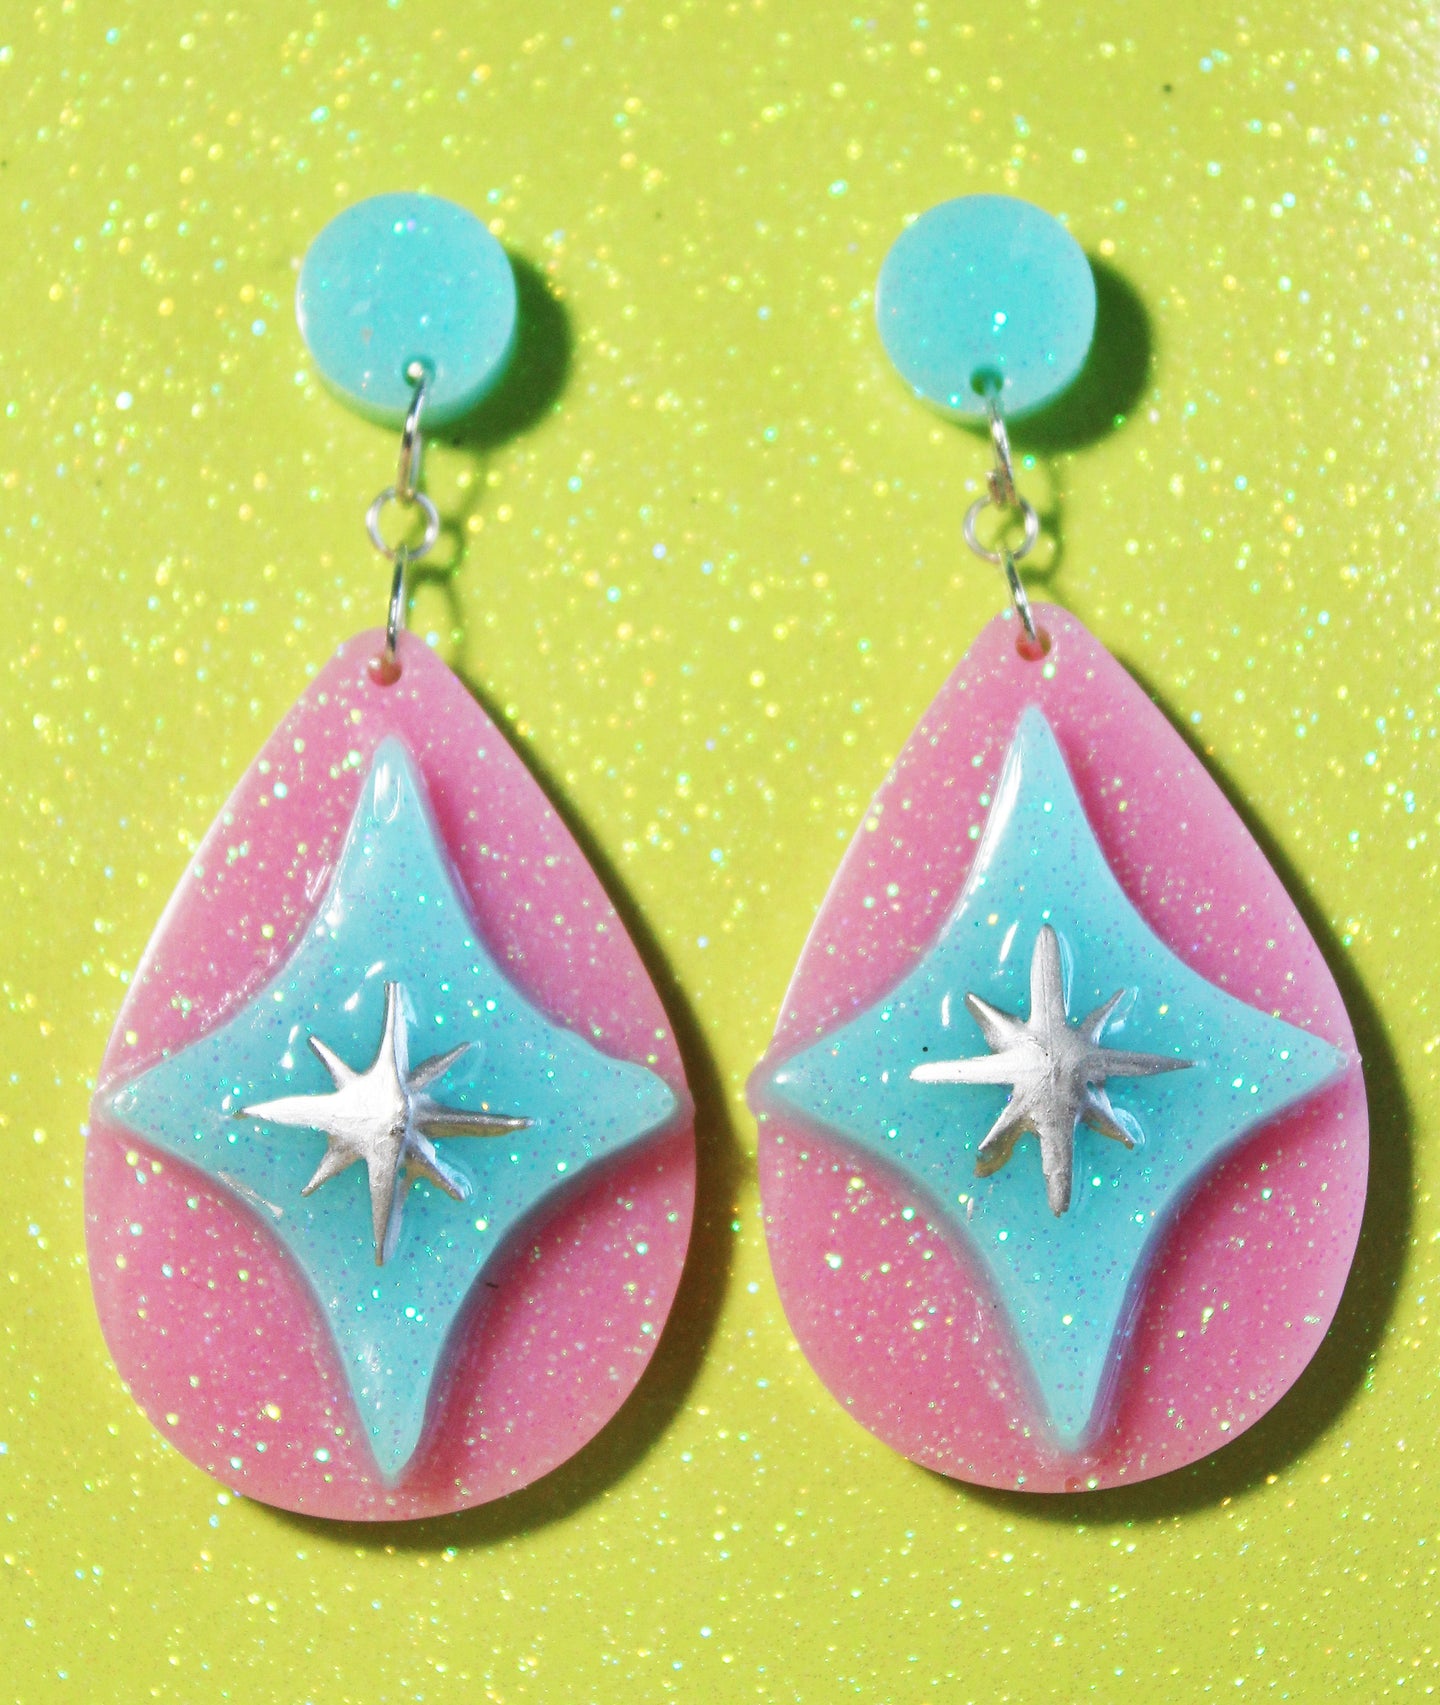 Vagabond Retro Earrings in turquoise & pink